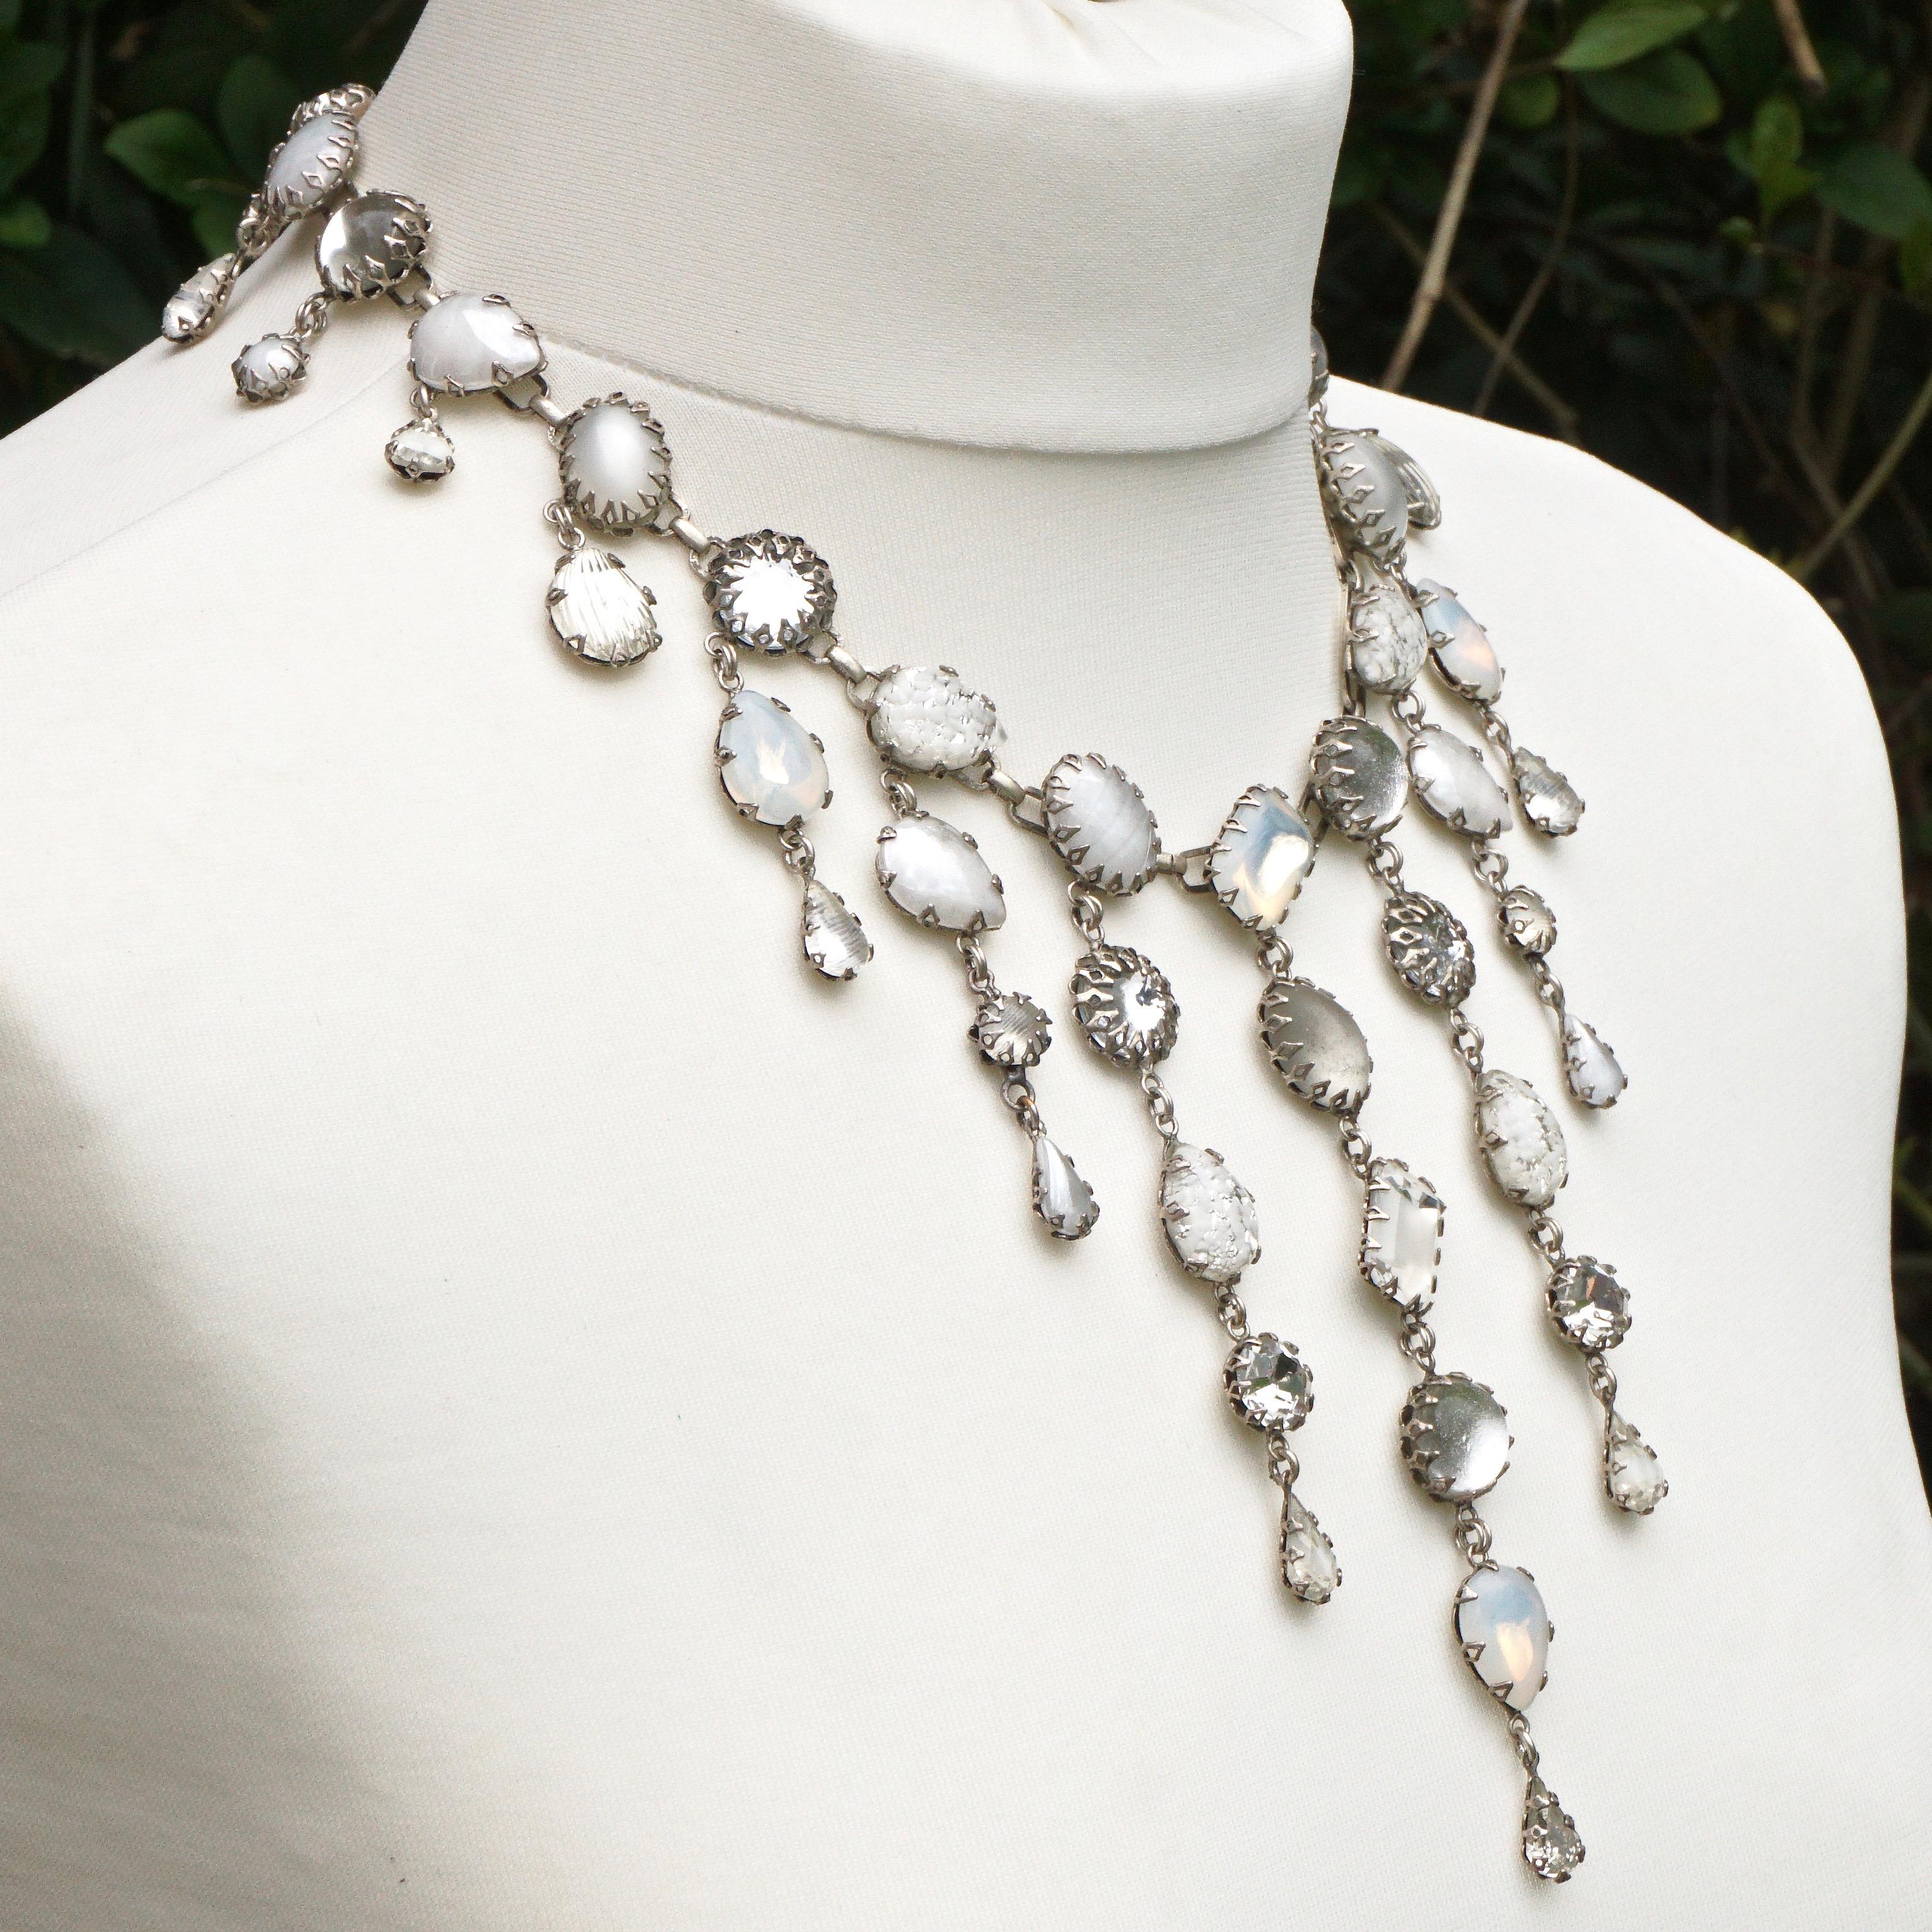 Fabulous De Luxe NYC/A'dam silver tone and art glass drop necklace with a curb link extension chain. Dropping from the necklace are beautiful white, clear and opaline glass drops. The necklace measures length 53.34cm / 21 inches, and the longest